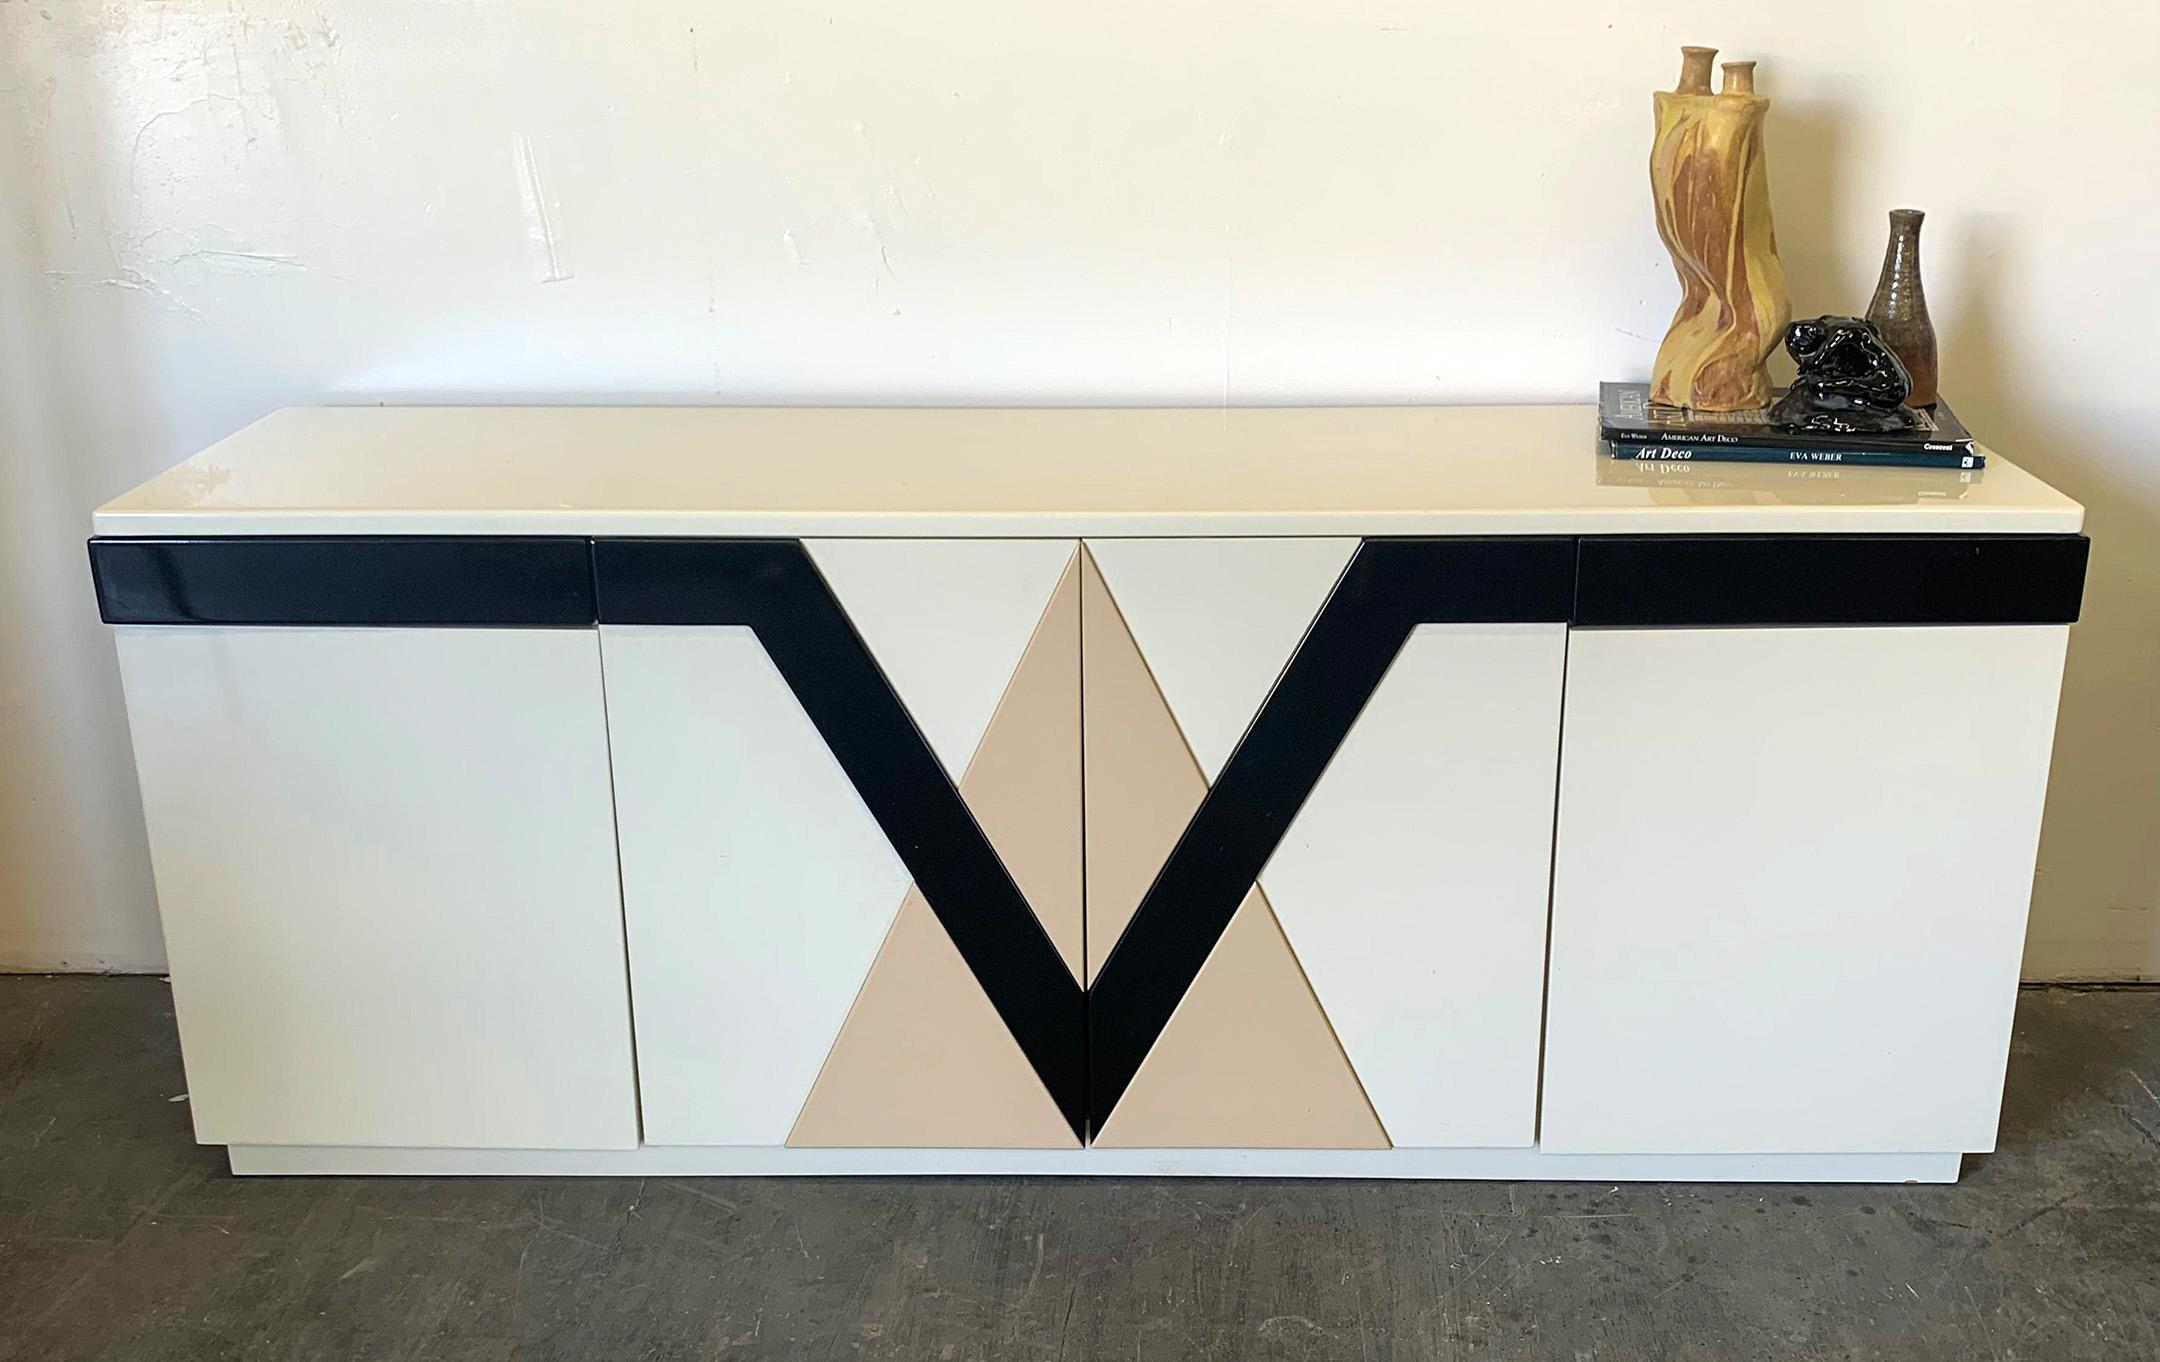 This credenza is simply stunning! A 1980s lacquered geometric credenza that just screams Kelly Wearstler style. The credenza features, doors and drawers and looks very Italian modern in style.

This credenza would pair very nicely with Karl